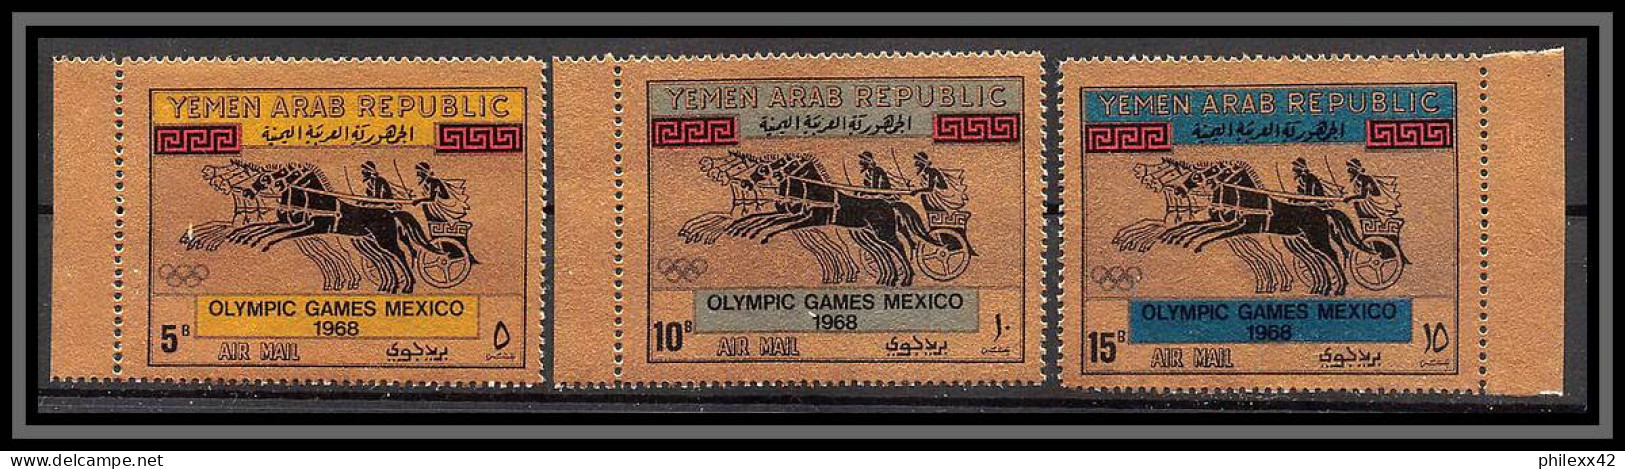 Nord Yemen YAR - 4402/ N°742/744 Jeux Olympiques (olympic Games) Mexico 1968 OR Gold Stamps Neuf ** MNH - Summer 1968: Mexico City